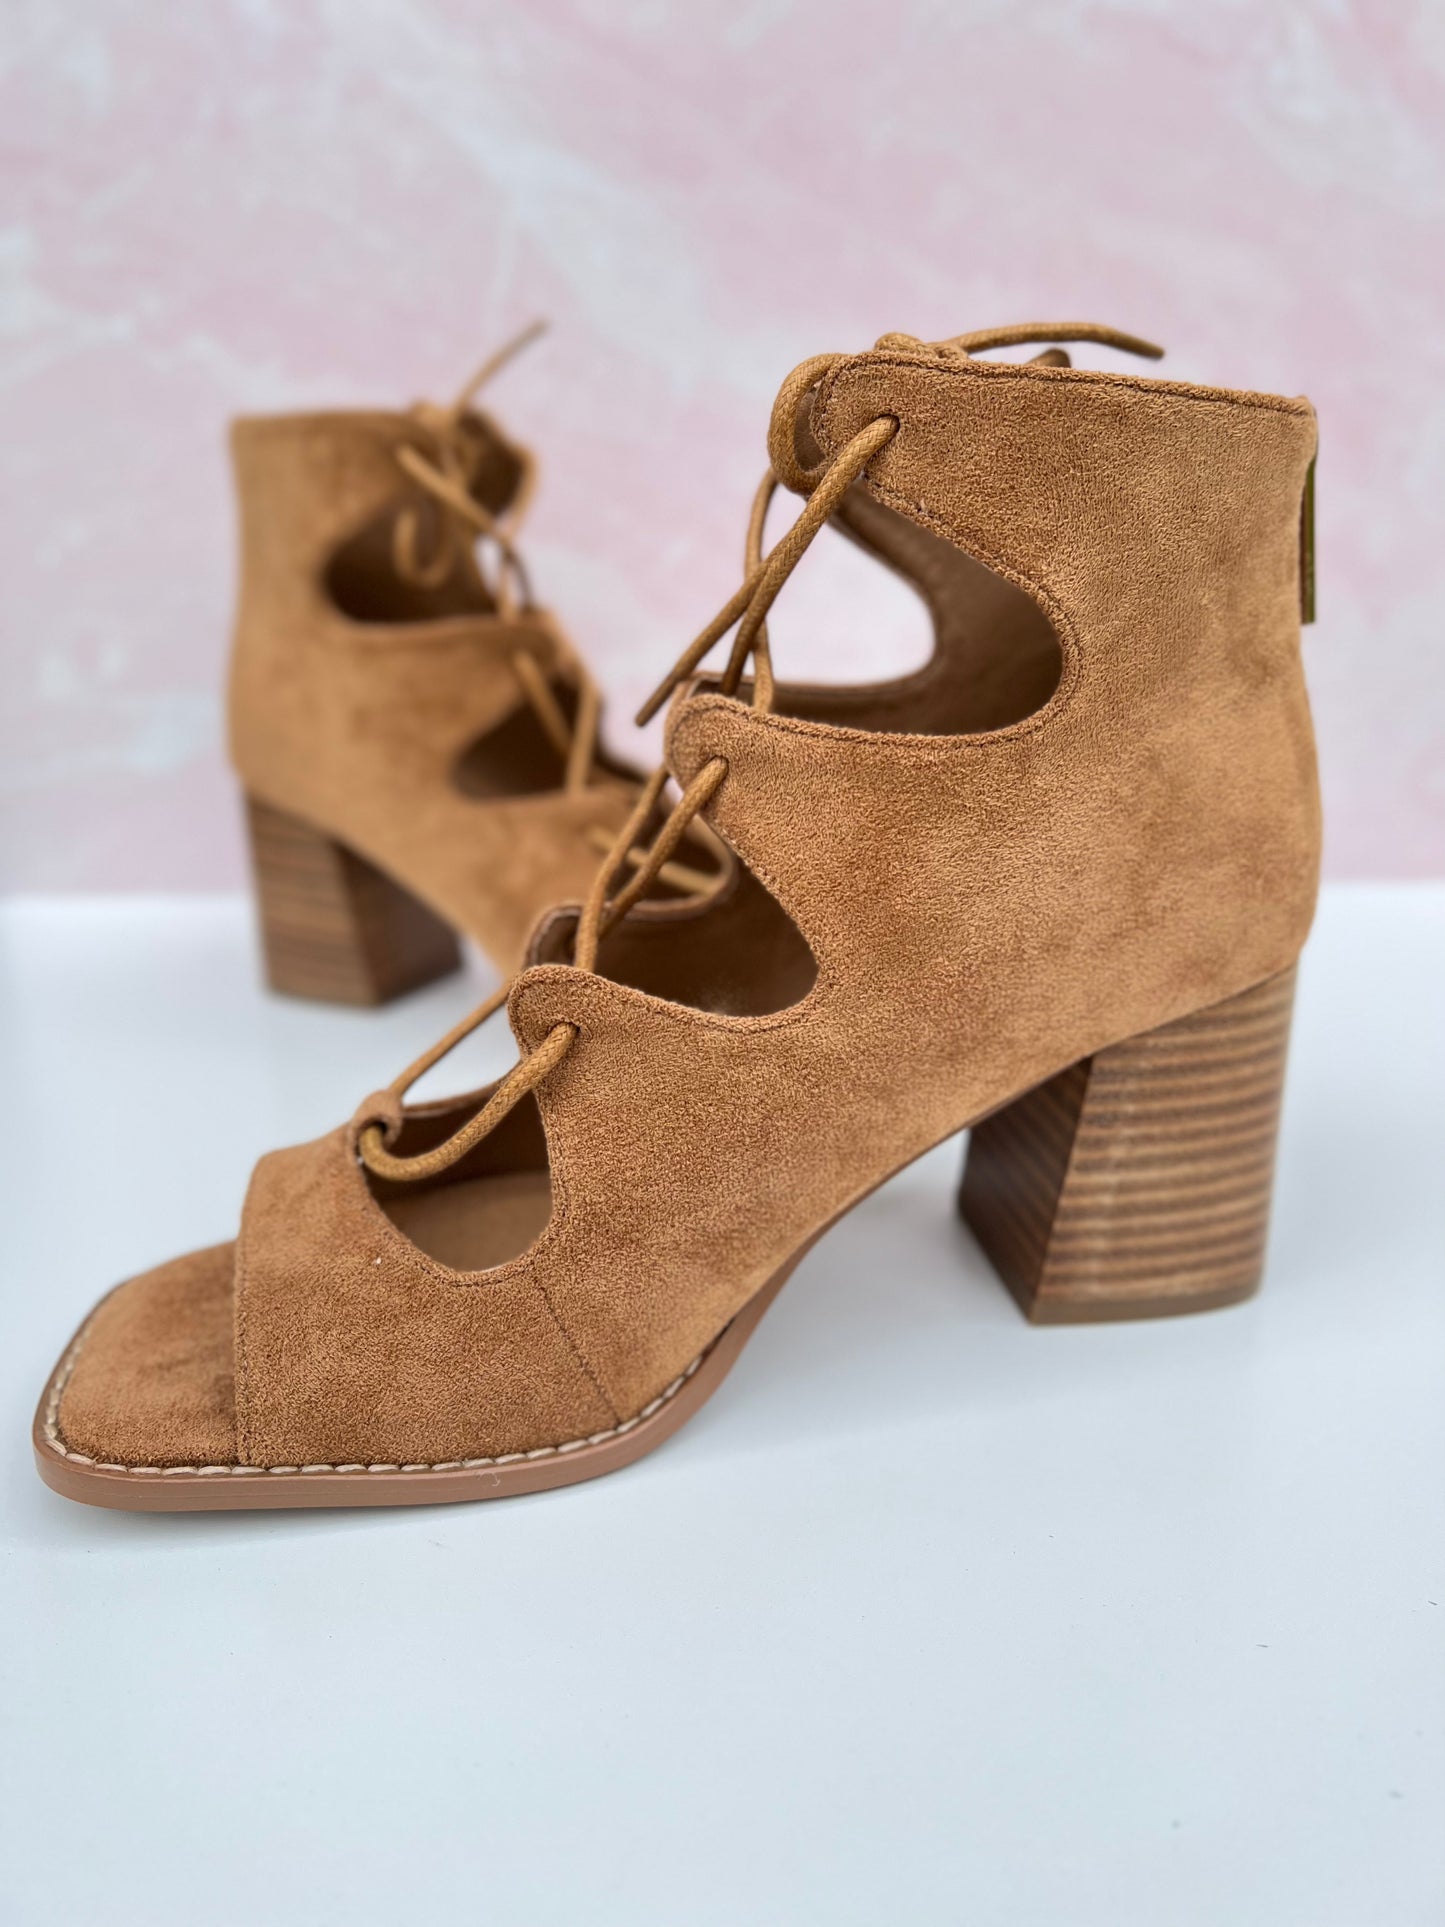 Corky's Wally Wedge - Camel Suede  - Final Sale